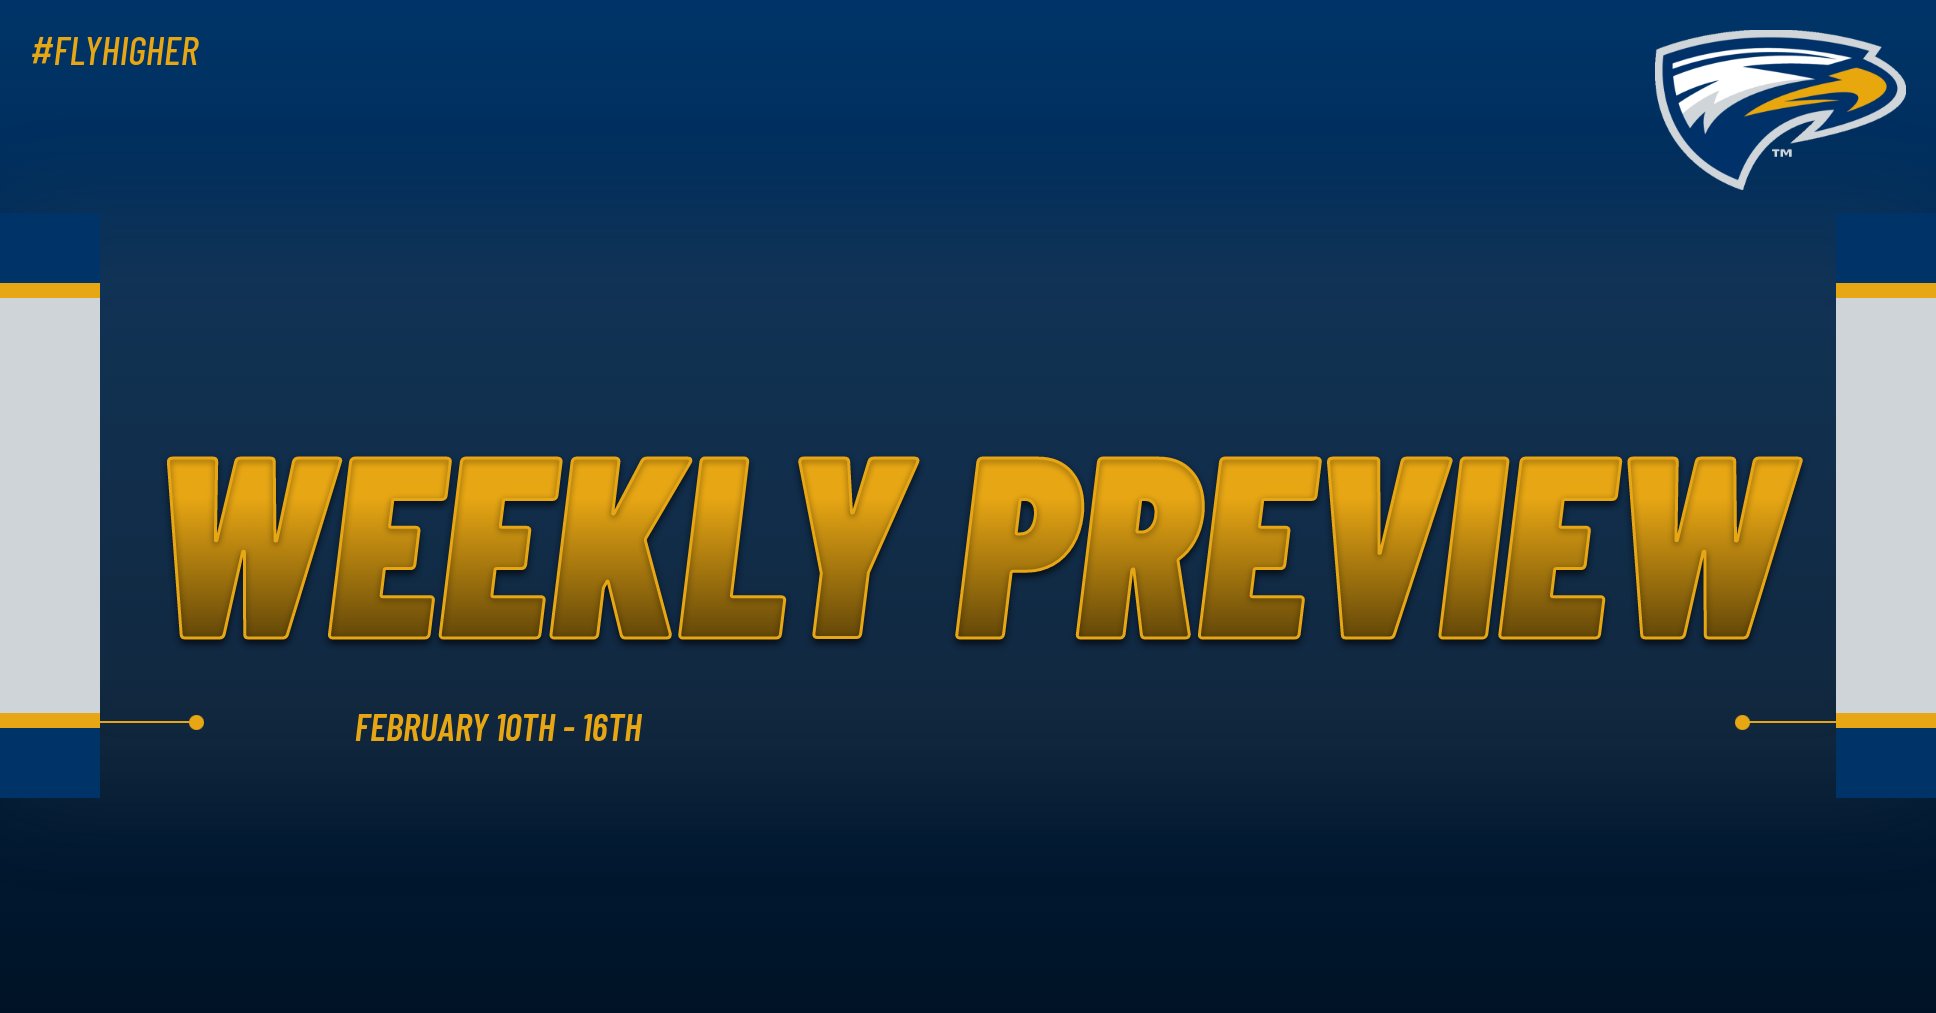 Emory Athletics Weekly Preview - February 10th - 16th